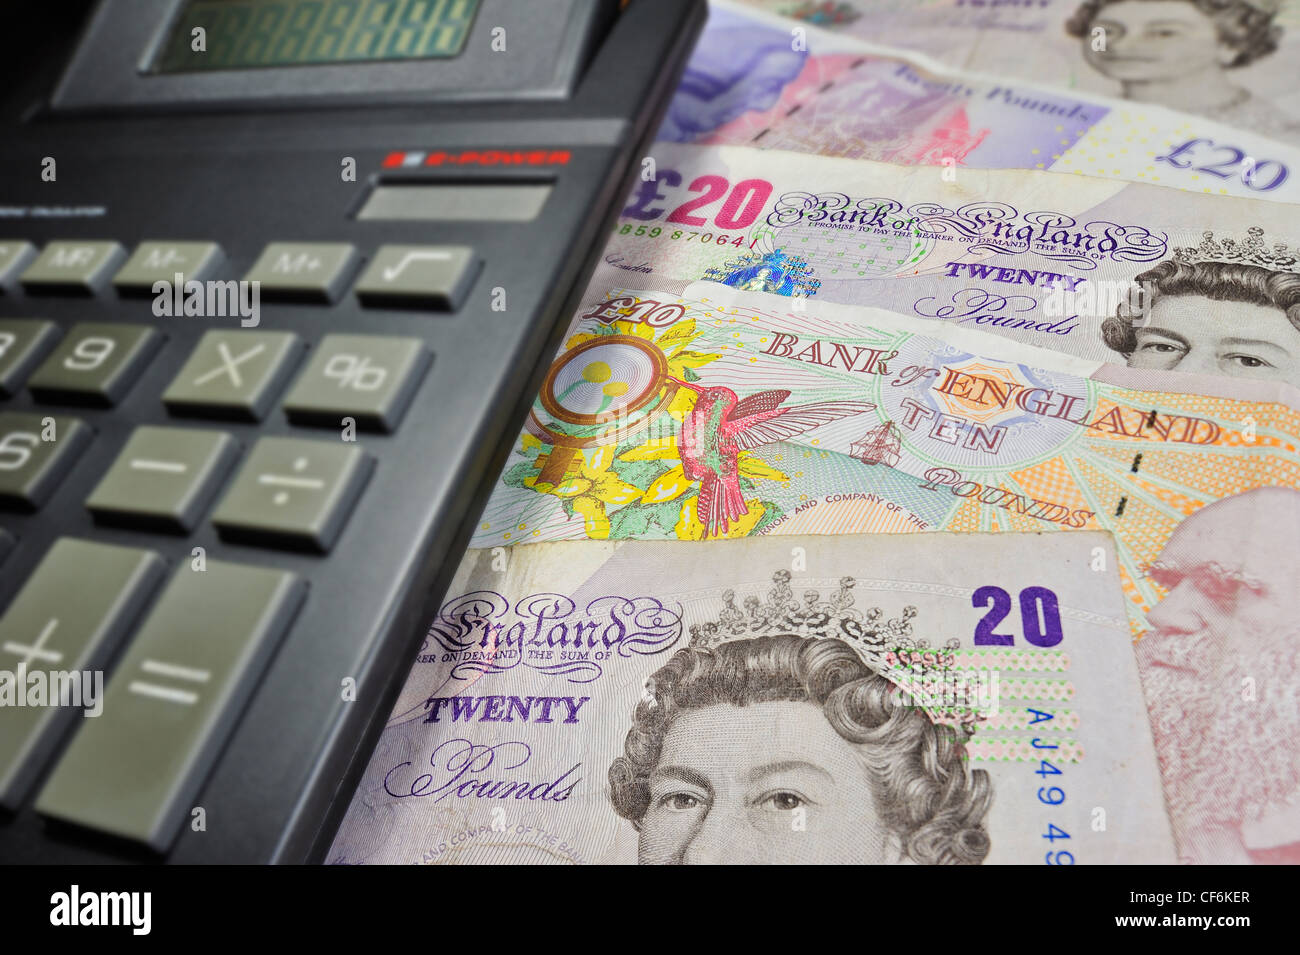 English UK banknotes in British pound sterling currency and pocket calculator, Great Britain Stock Photo